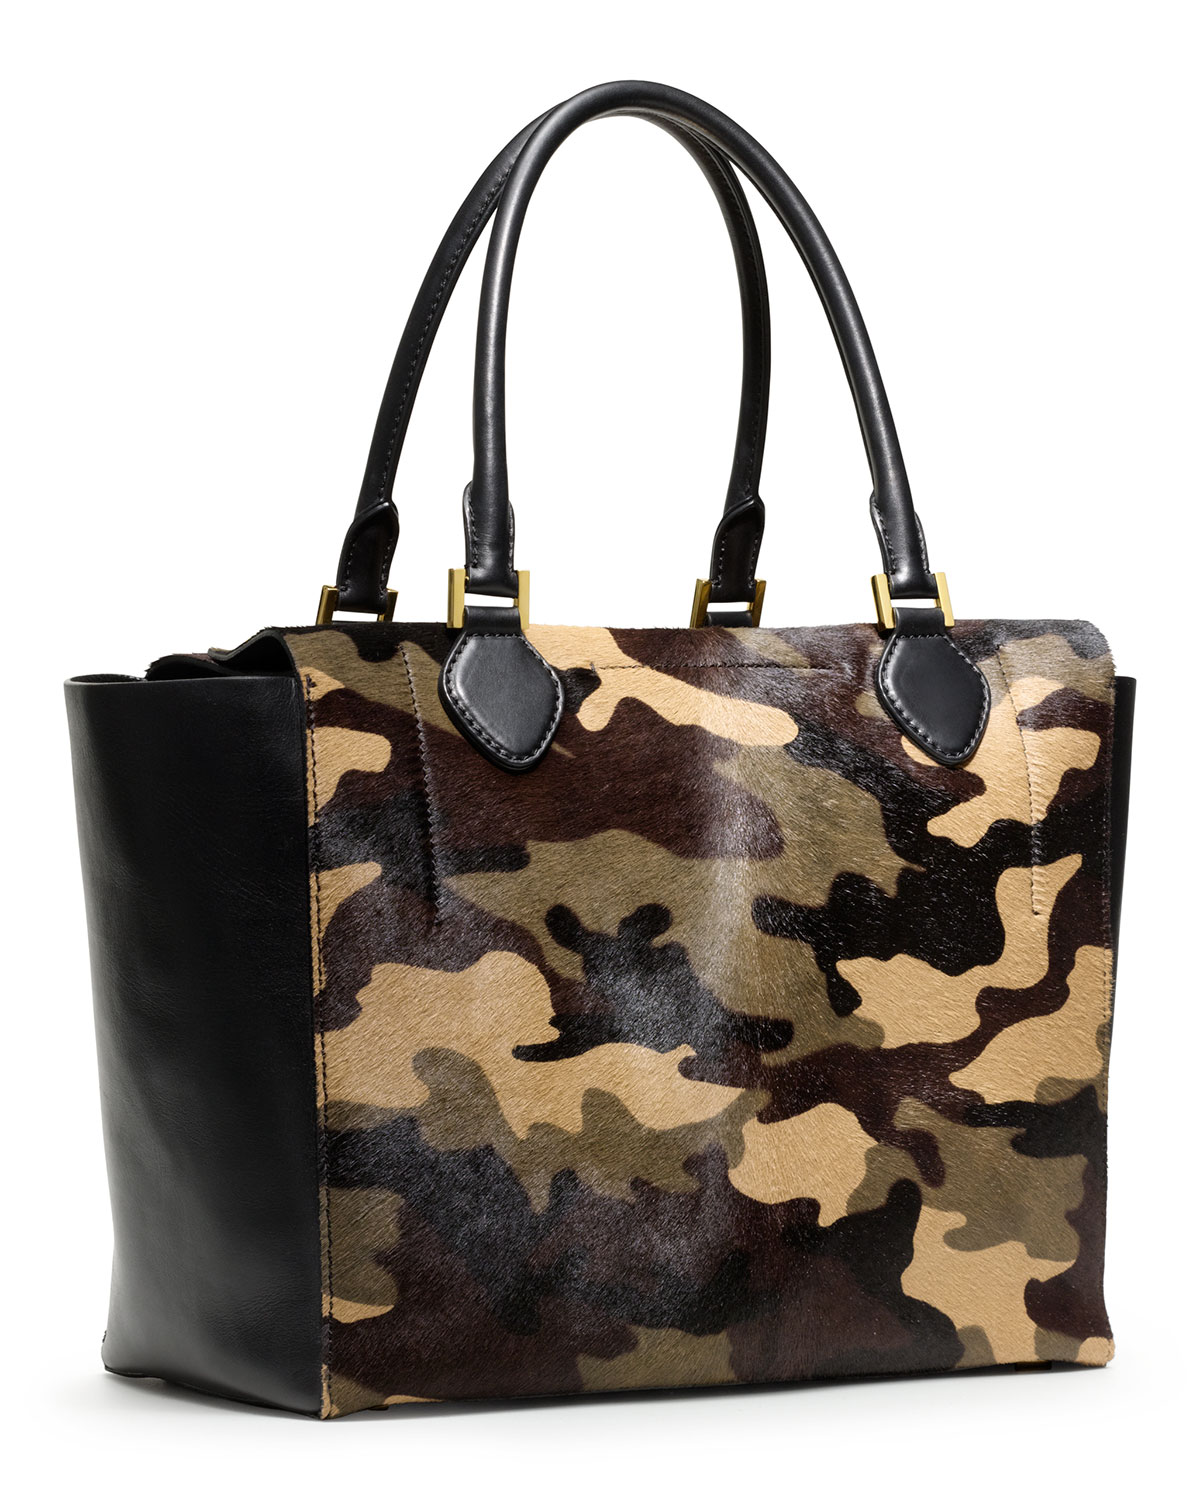 Michael Kors Large Miranda Camouflage Calfhair Tote in Olive (Green) - Lyst